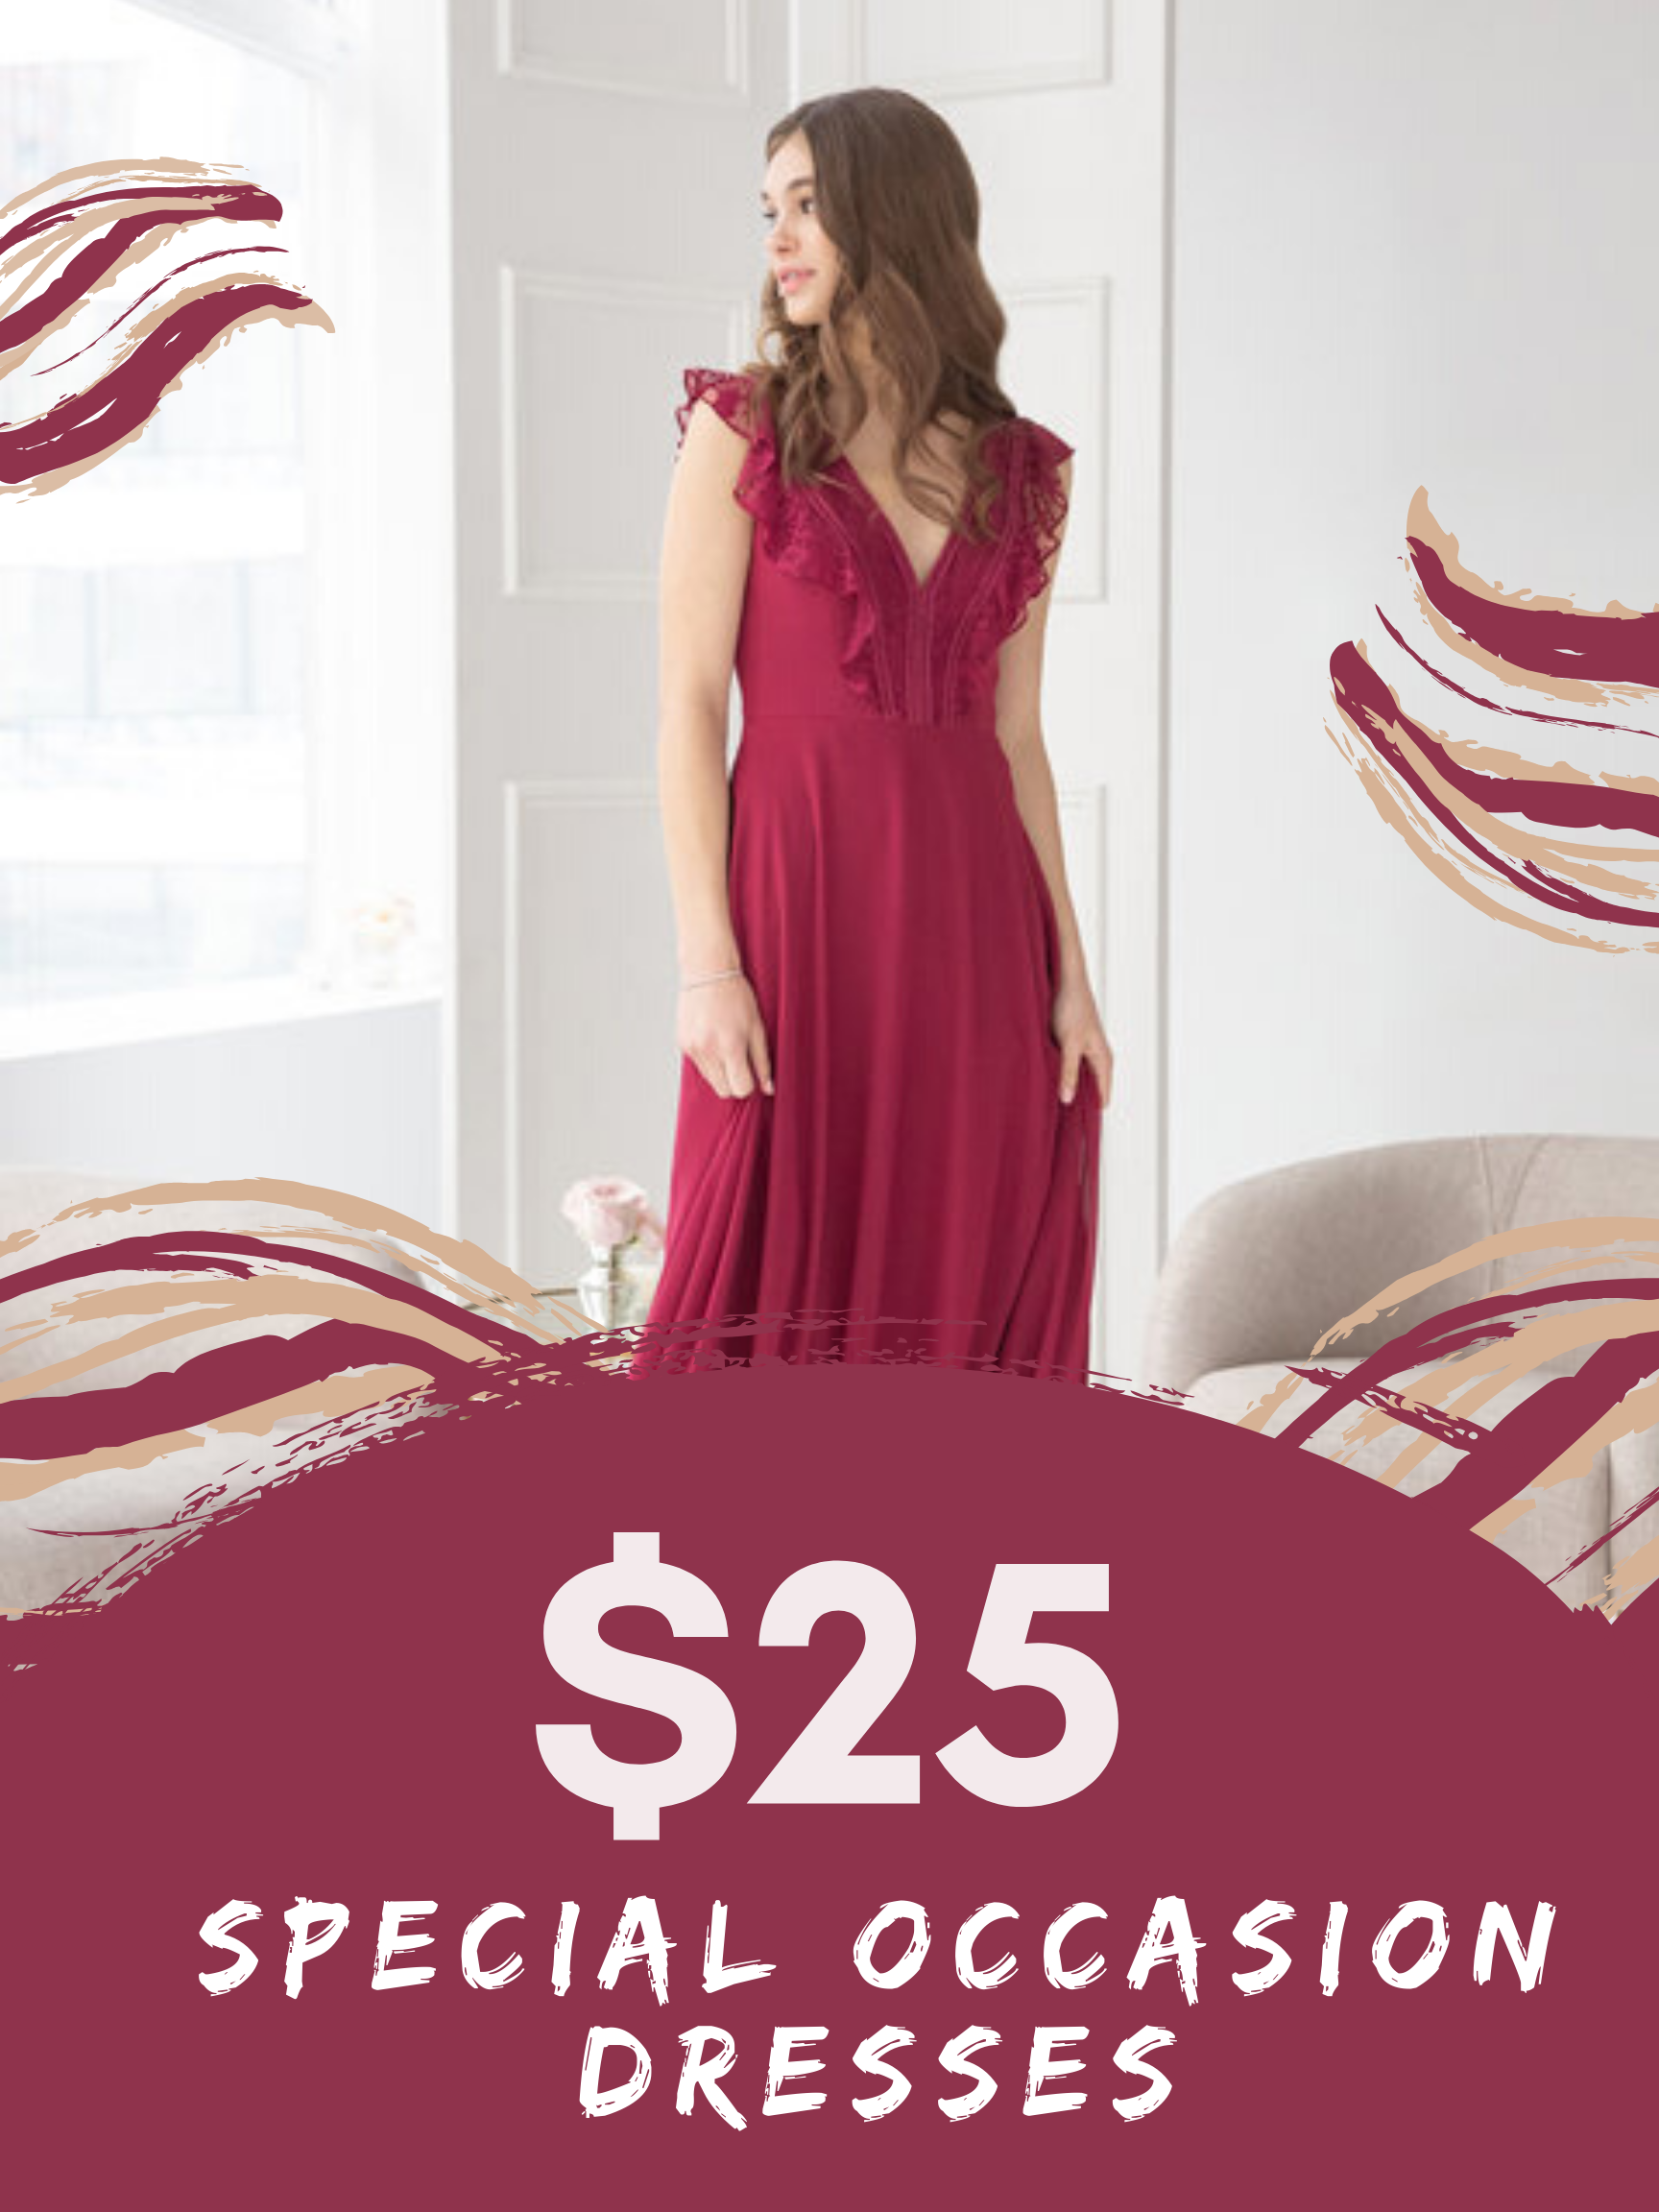 ivory-and-beau-blog-special-occasion-dresses-sale-savannah-bridal-boutique-1.png